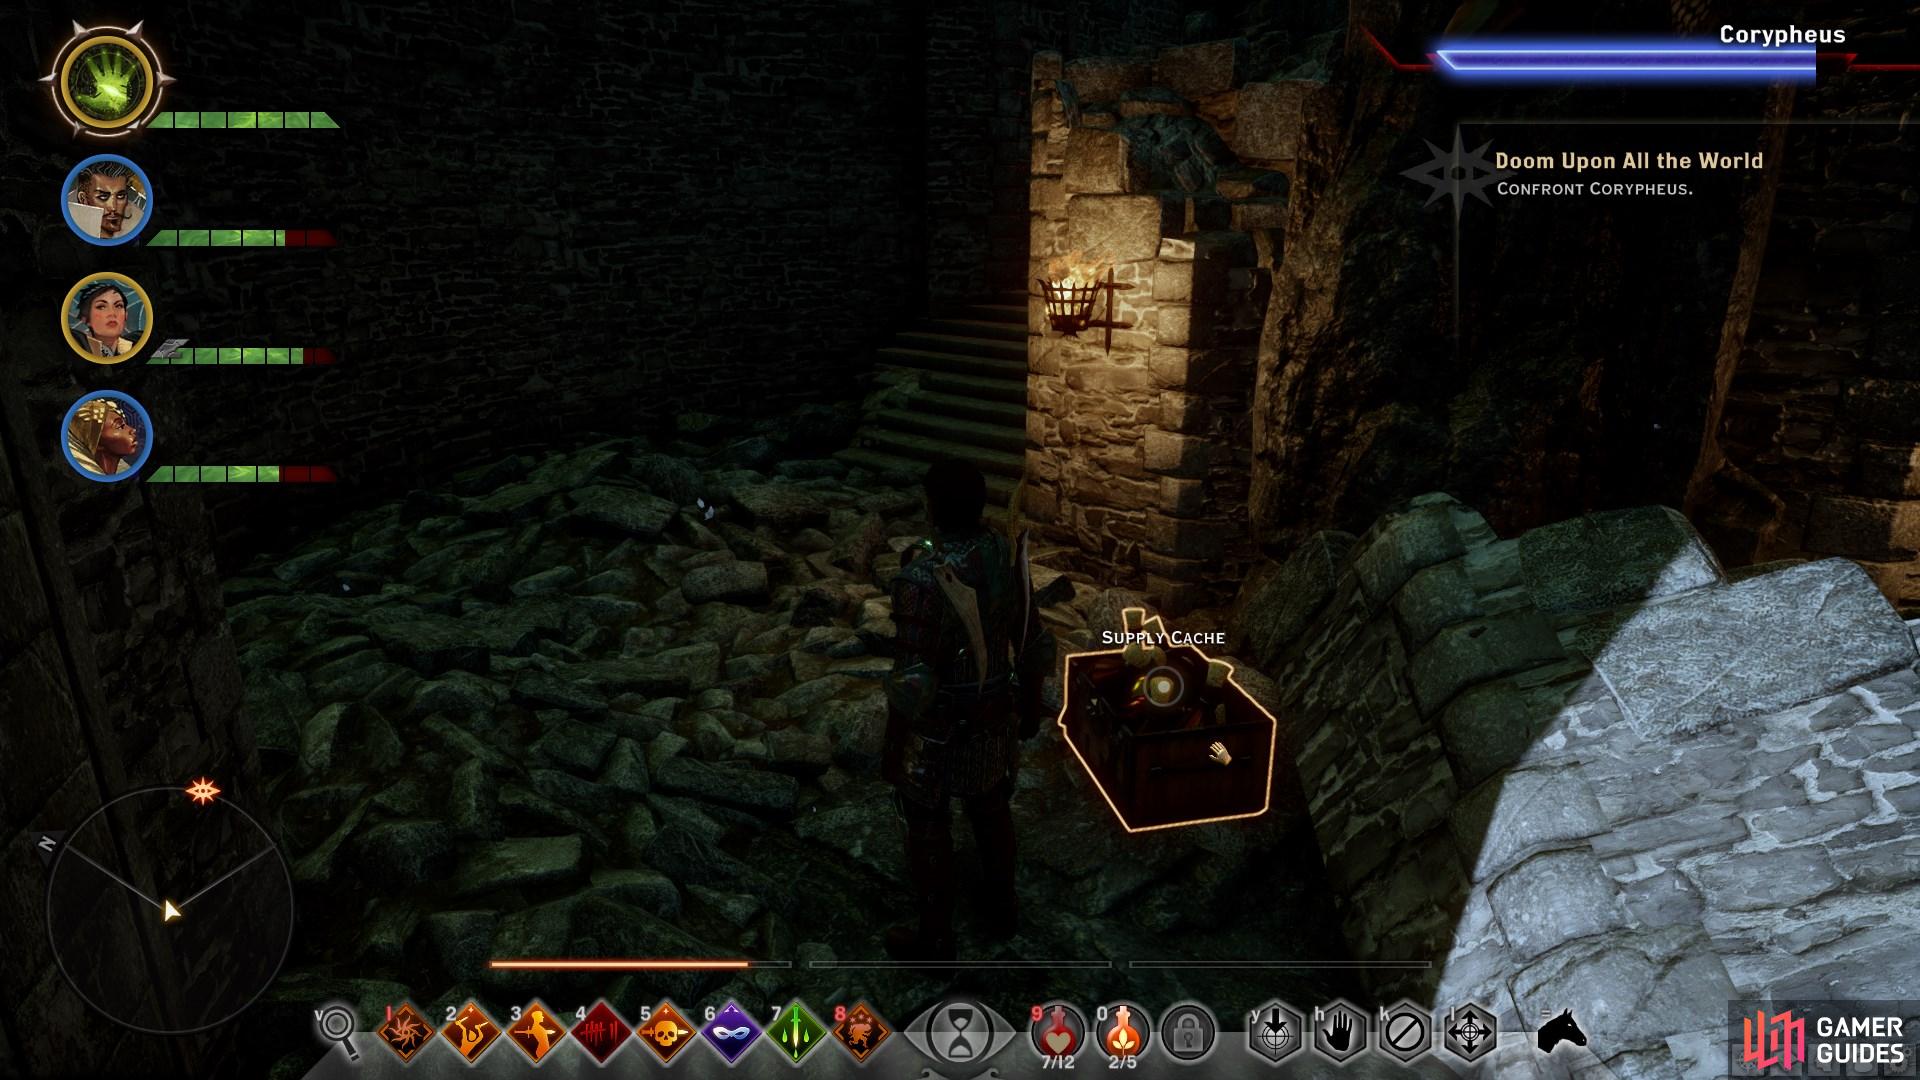 Be sure to use the supply cache on the stairs as you pursue Corypheus.